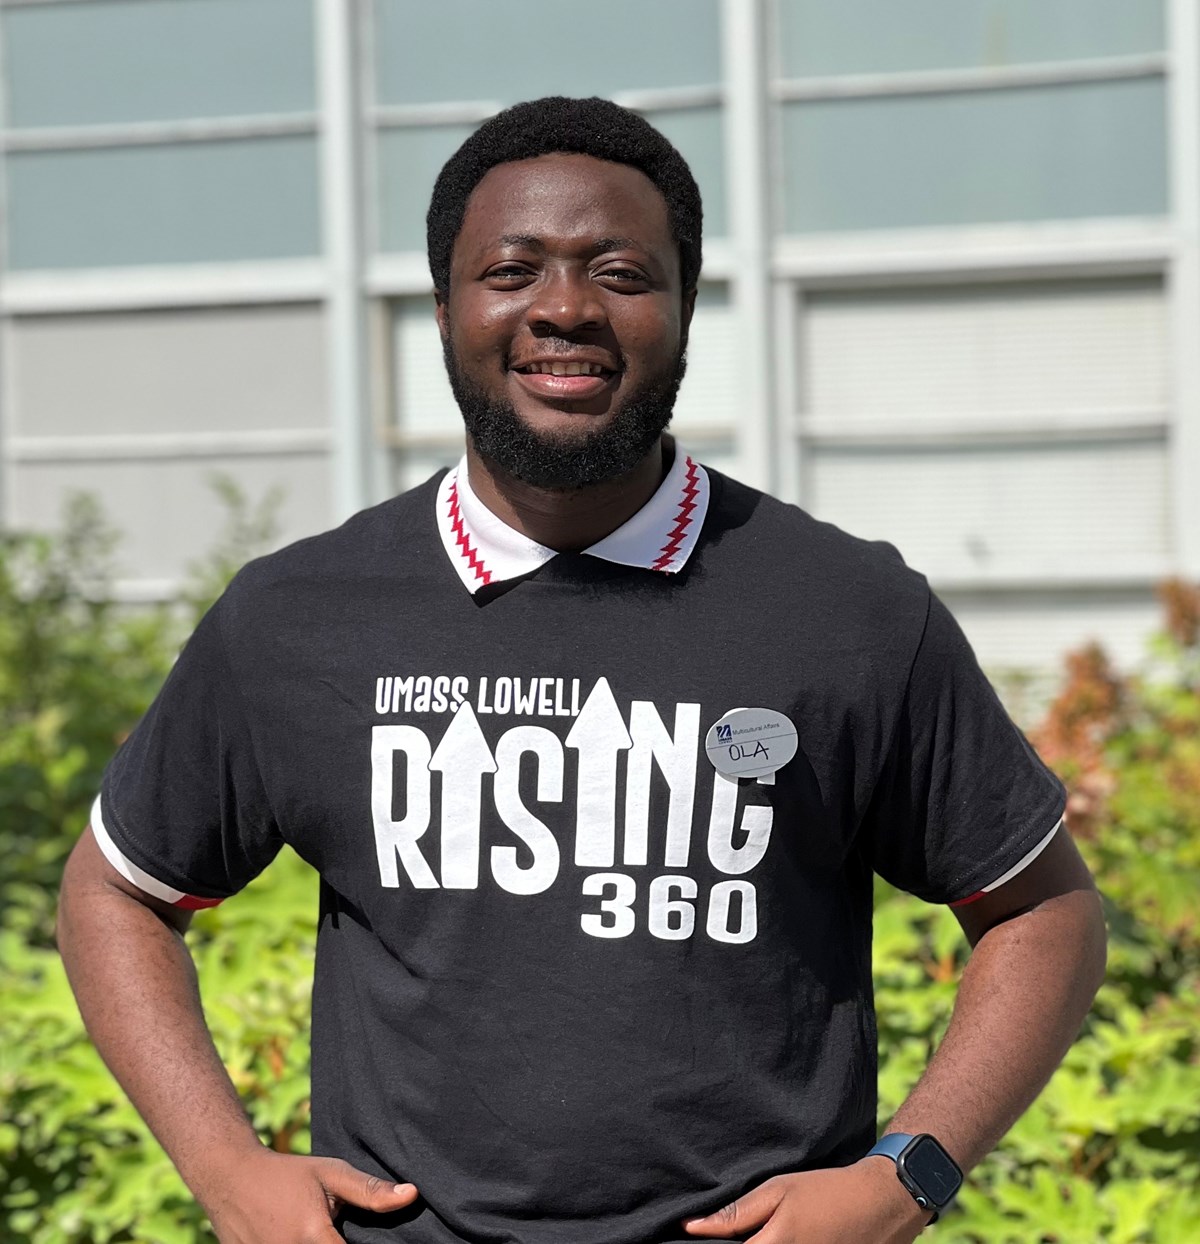 Olasunkanmi Olorunsaye standing outside wearing a shirt with text: UMass Lowell Rising 360 and a name tag with OLA on it.